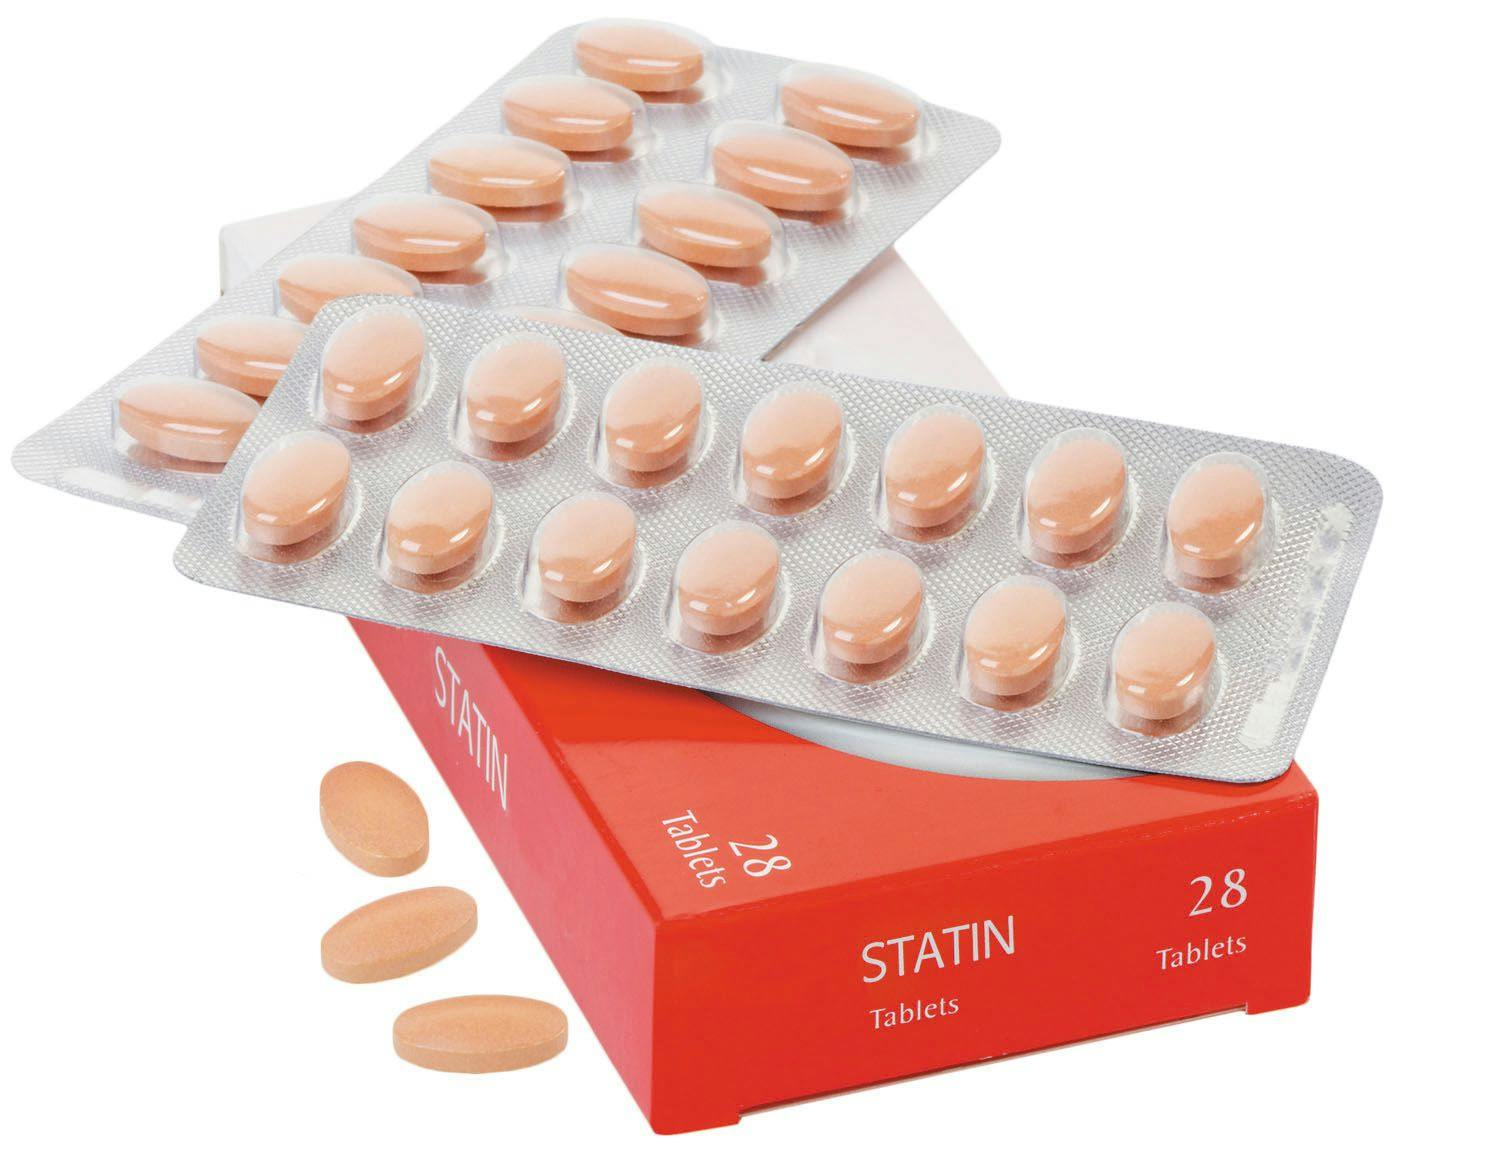 Expanding Statin Treatment Could be Cost-Effective and Prevent ASCVD Events